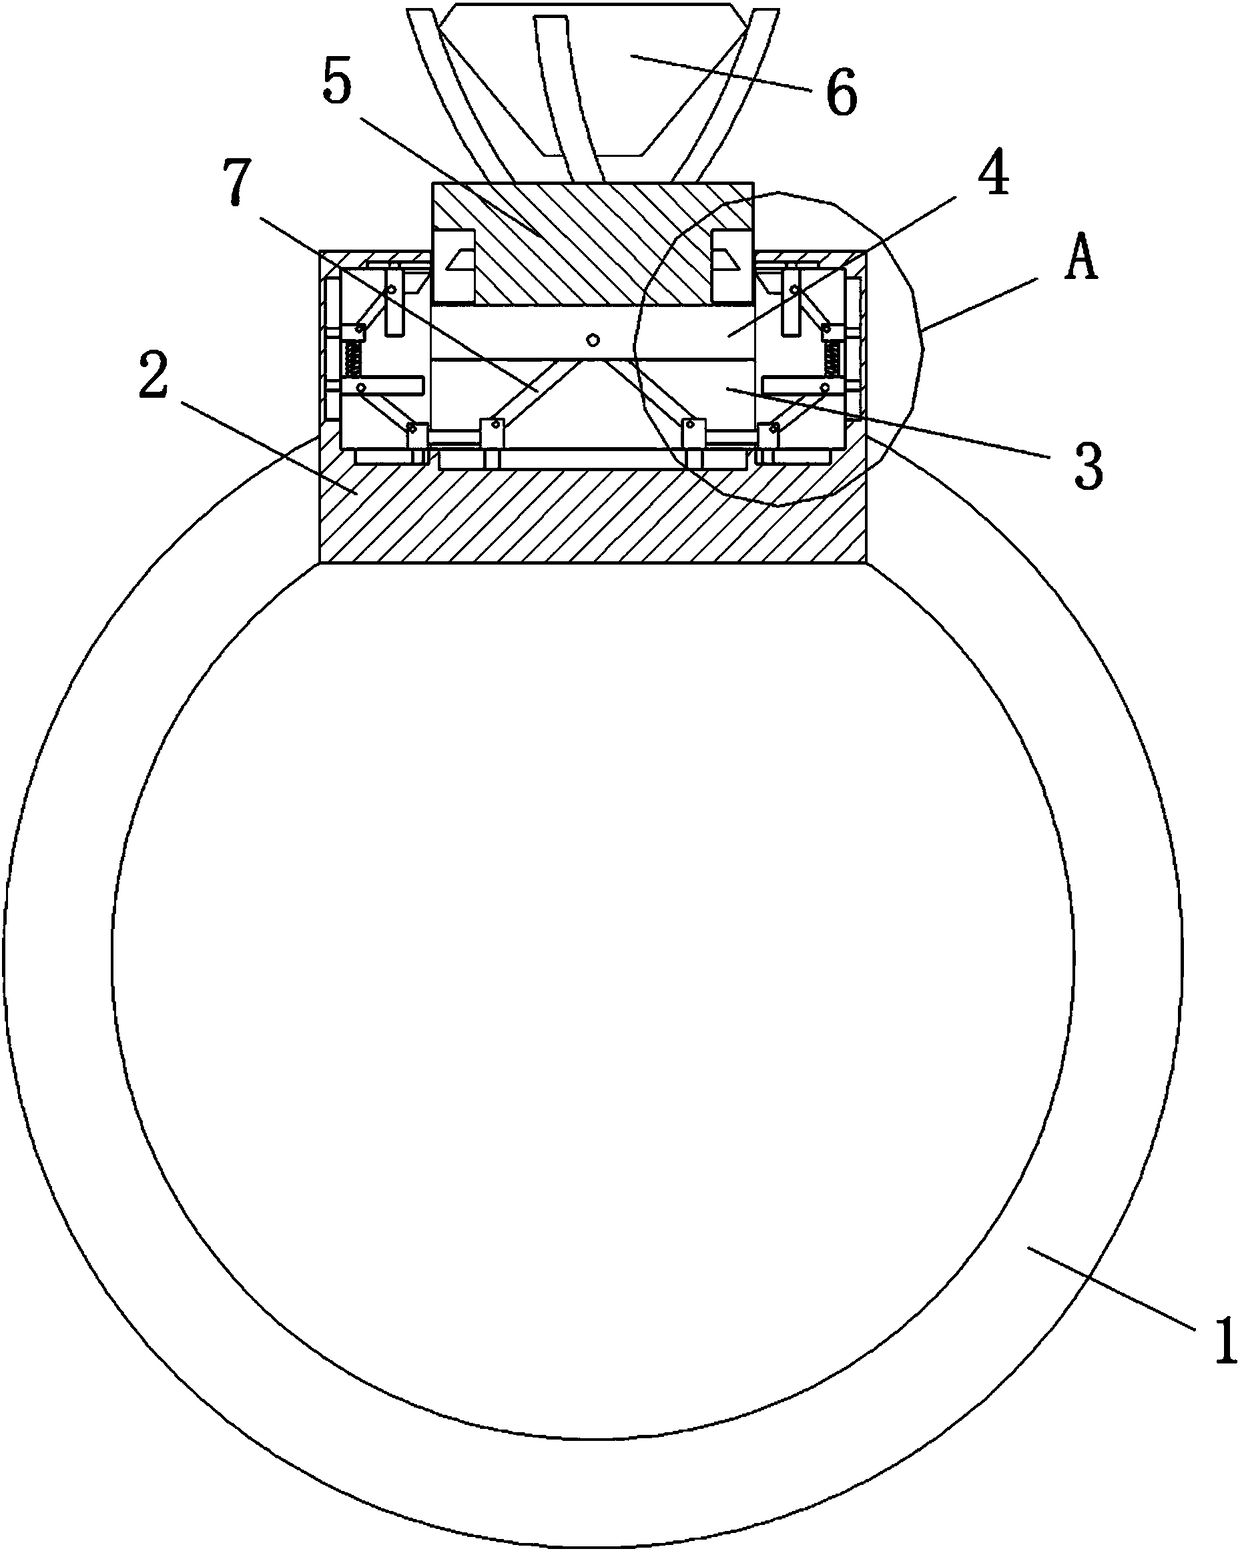 Combined ring with convenient ring surface replacement and replacement method